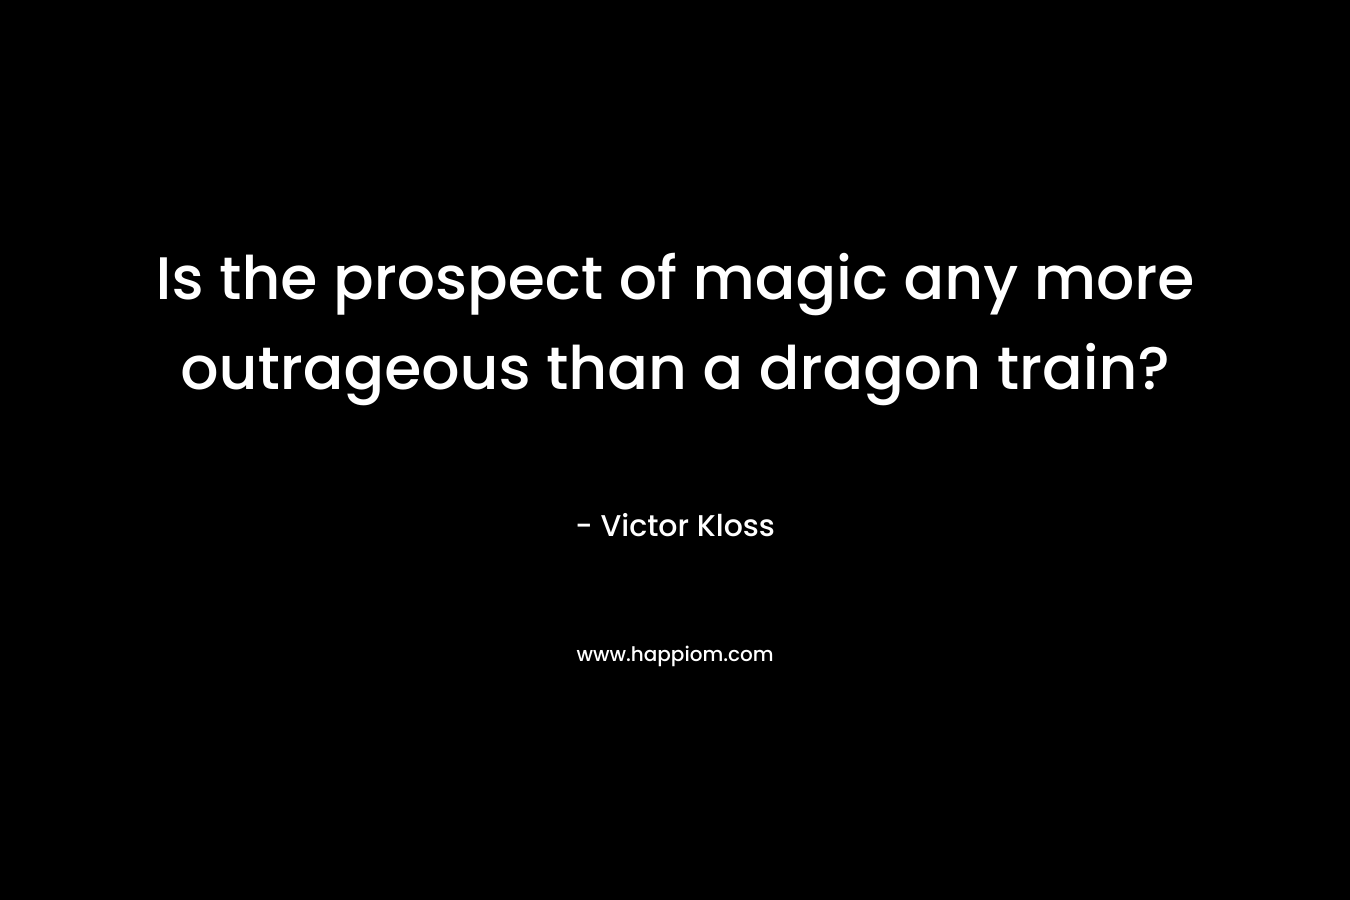 Is the prospect of magic any more outrageous than a dragon train?